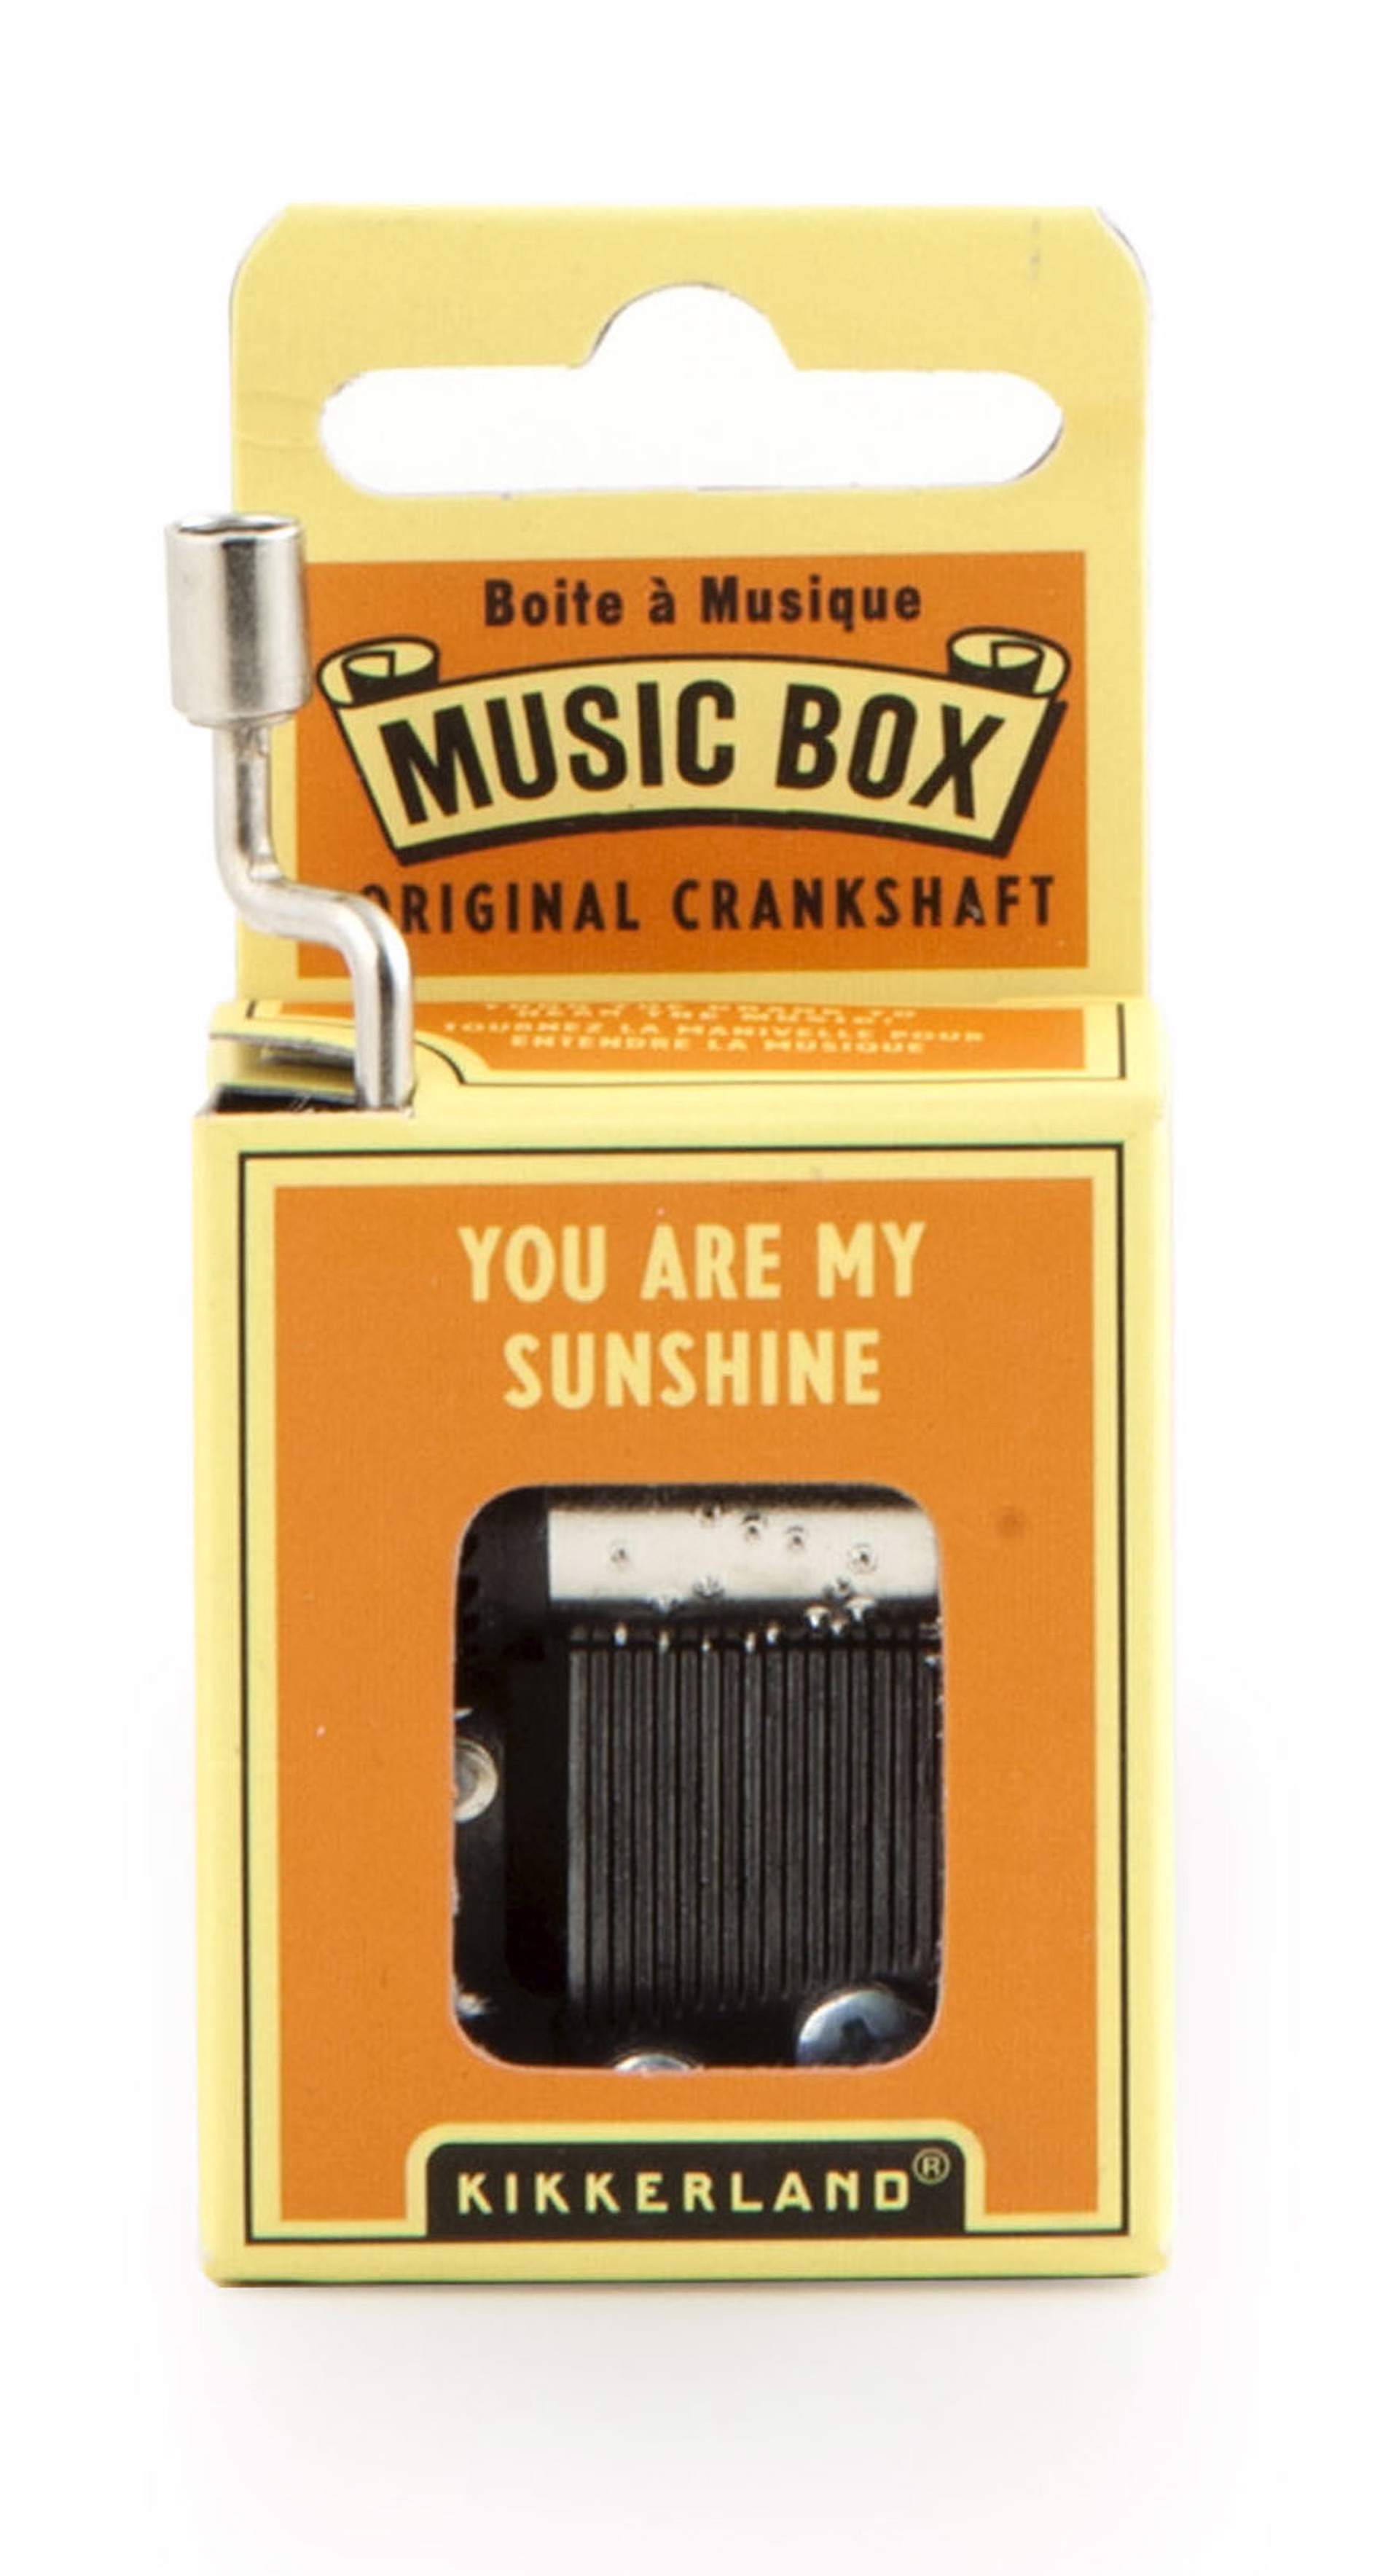 You Are My Sunshine by Chauvet Arts